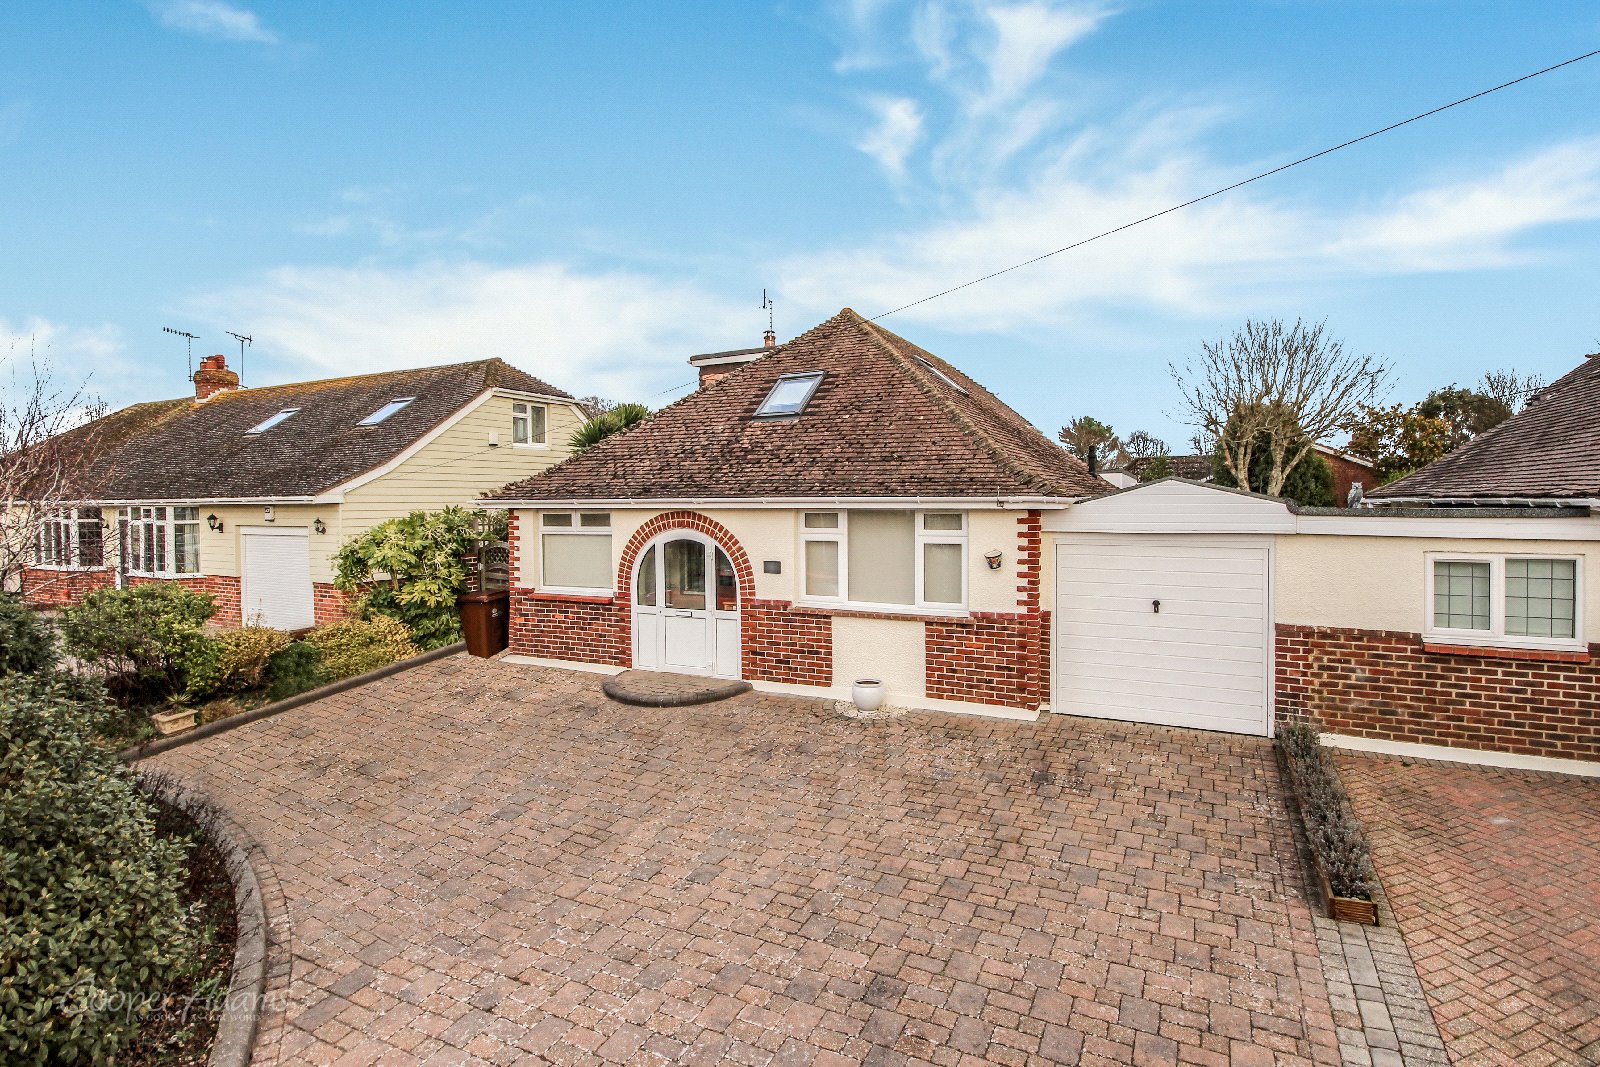 3 bed  for sale in North Lane, Rustington, BN16